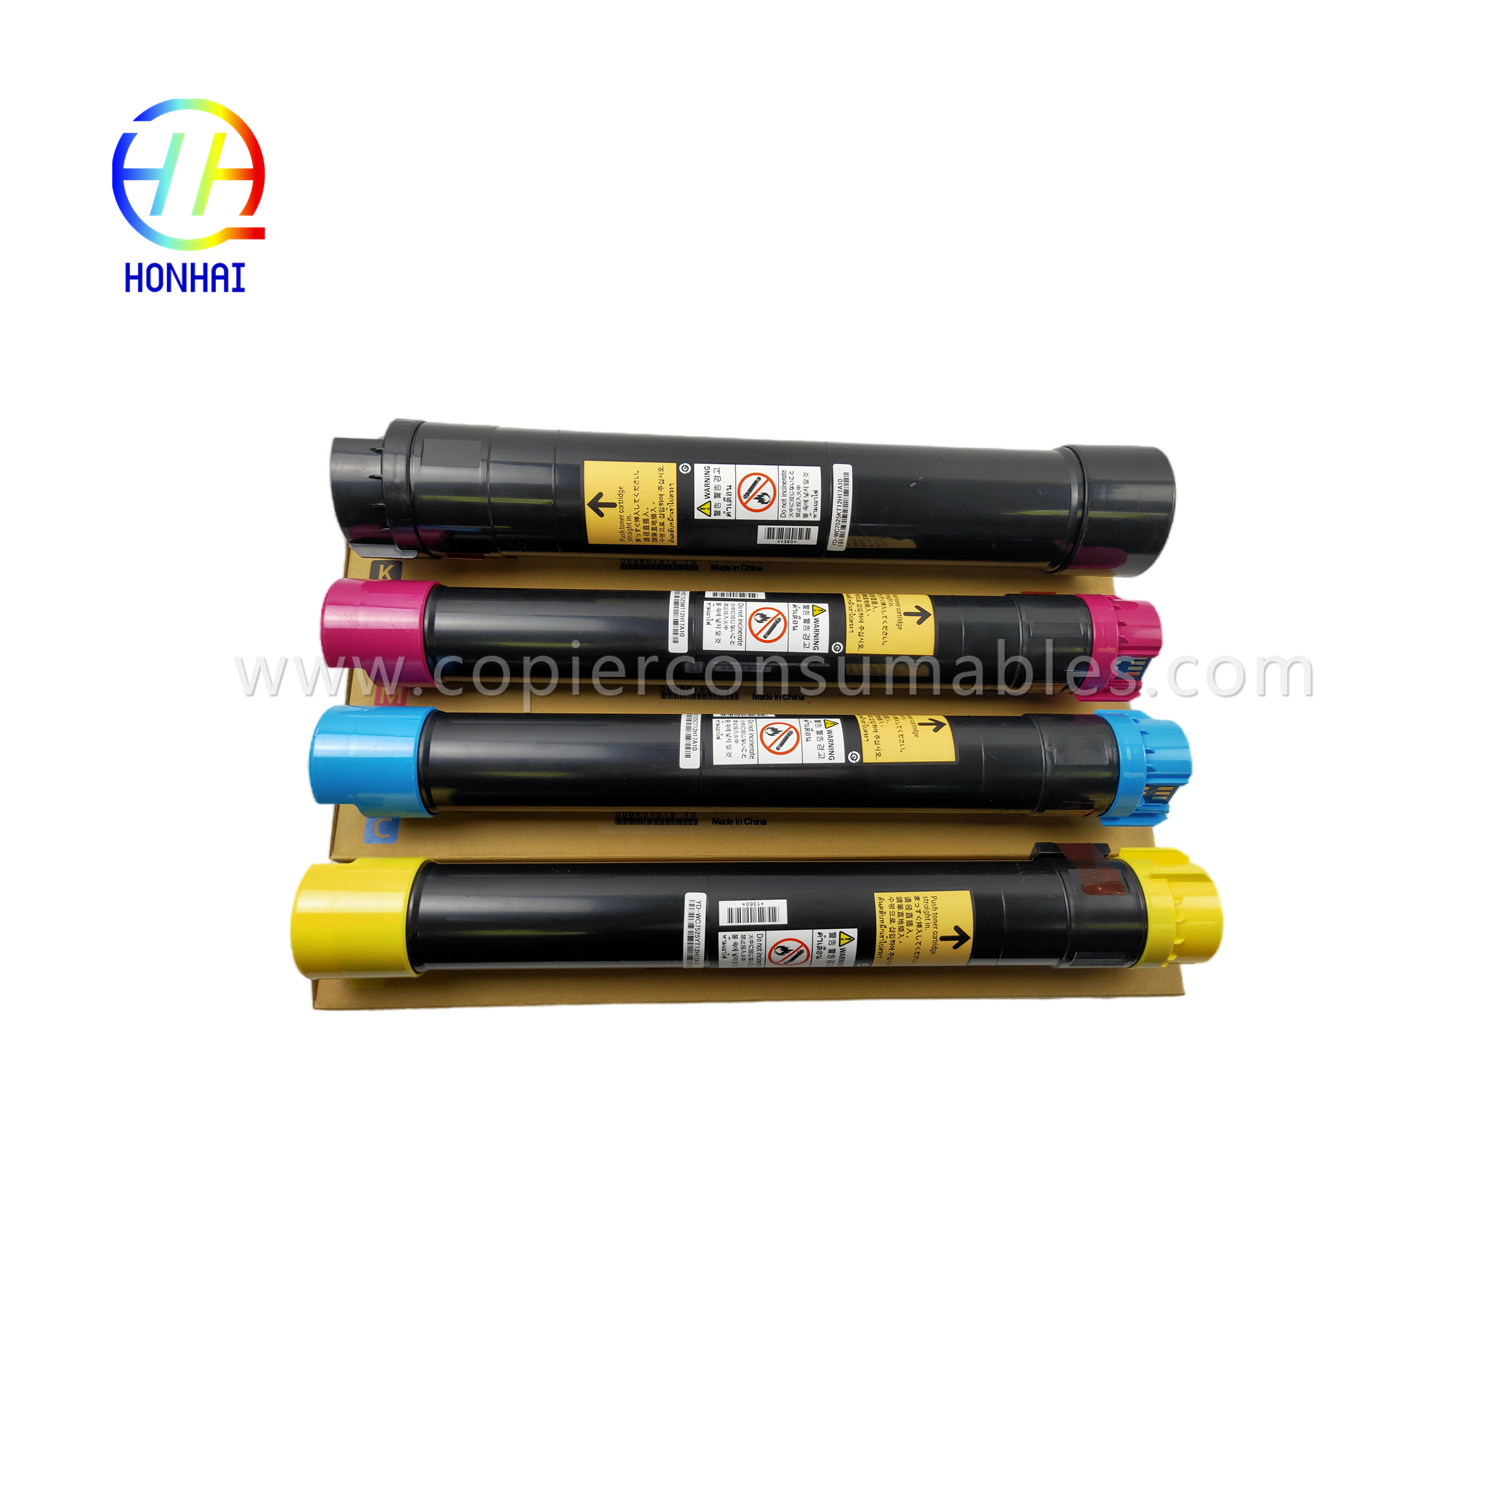 https://c585.goodao.net/toner-cartridge-imported-powder-set-bcmy-for-xerox-workcentre-7830-7835-7845-7855-7970-7525-7530-7535-7545-7556-0036r01 006r01514-006r01515-006r01516-produk/